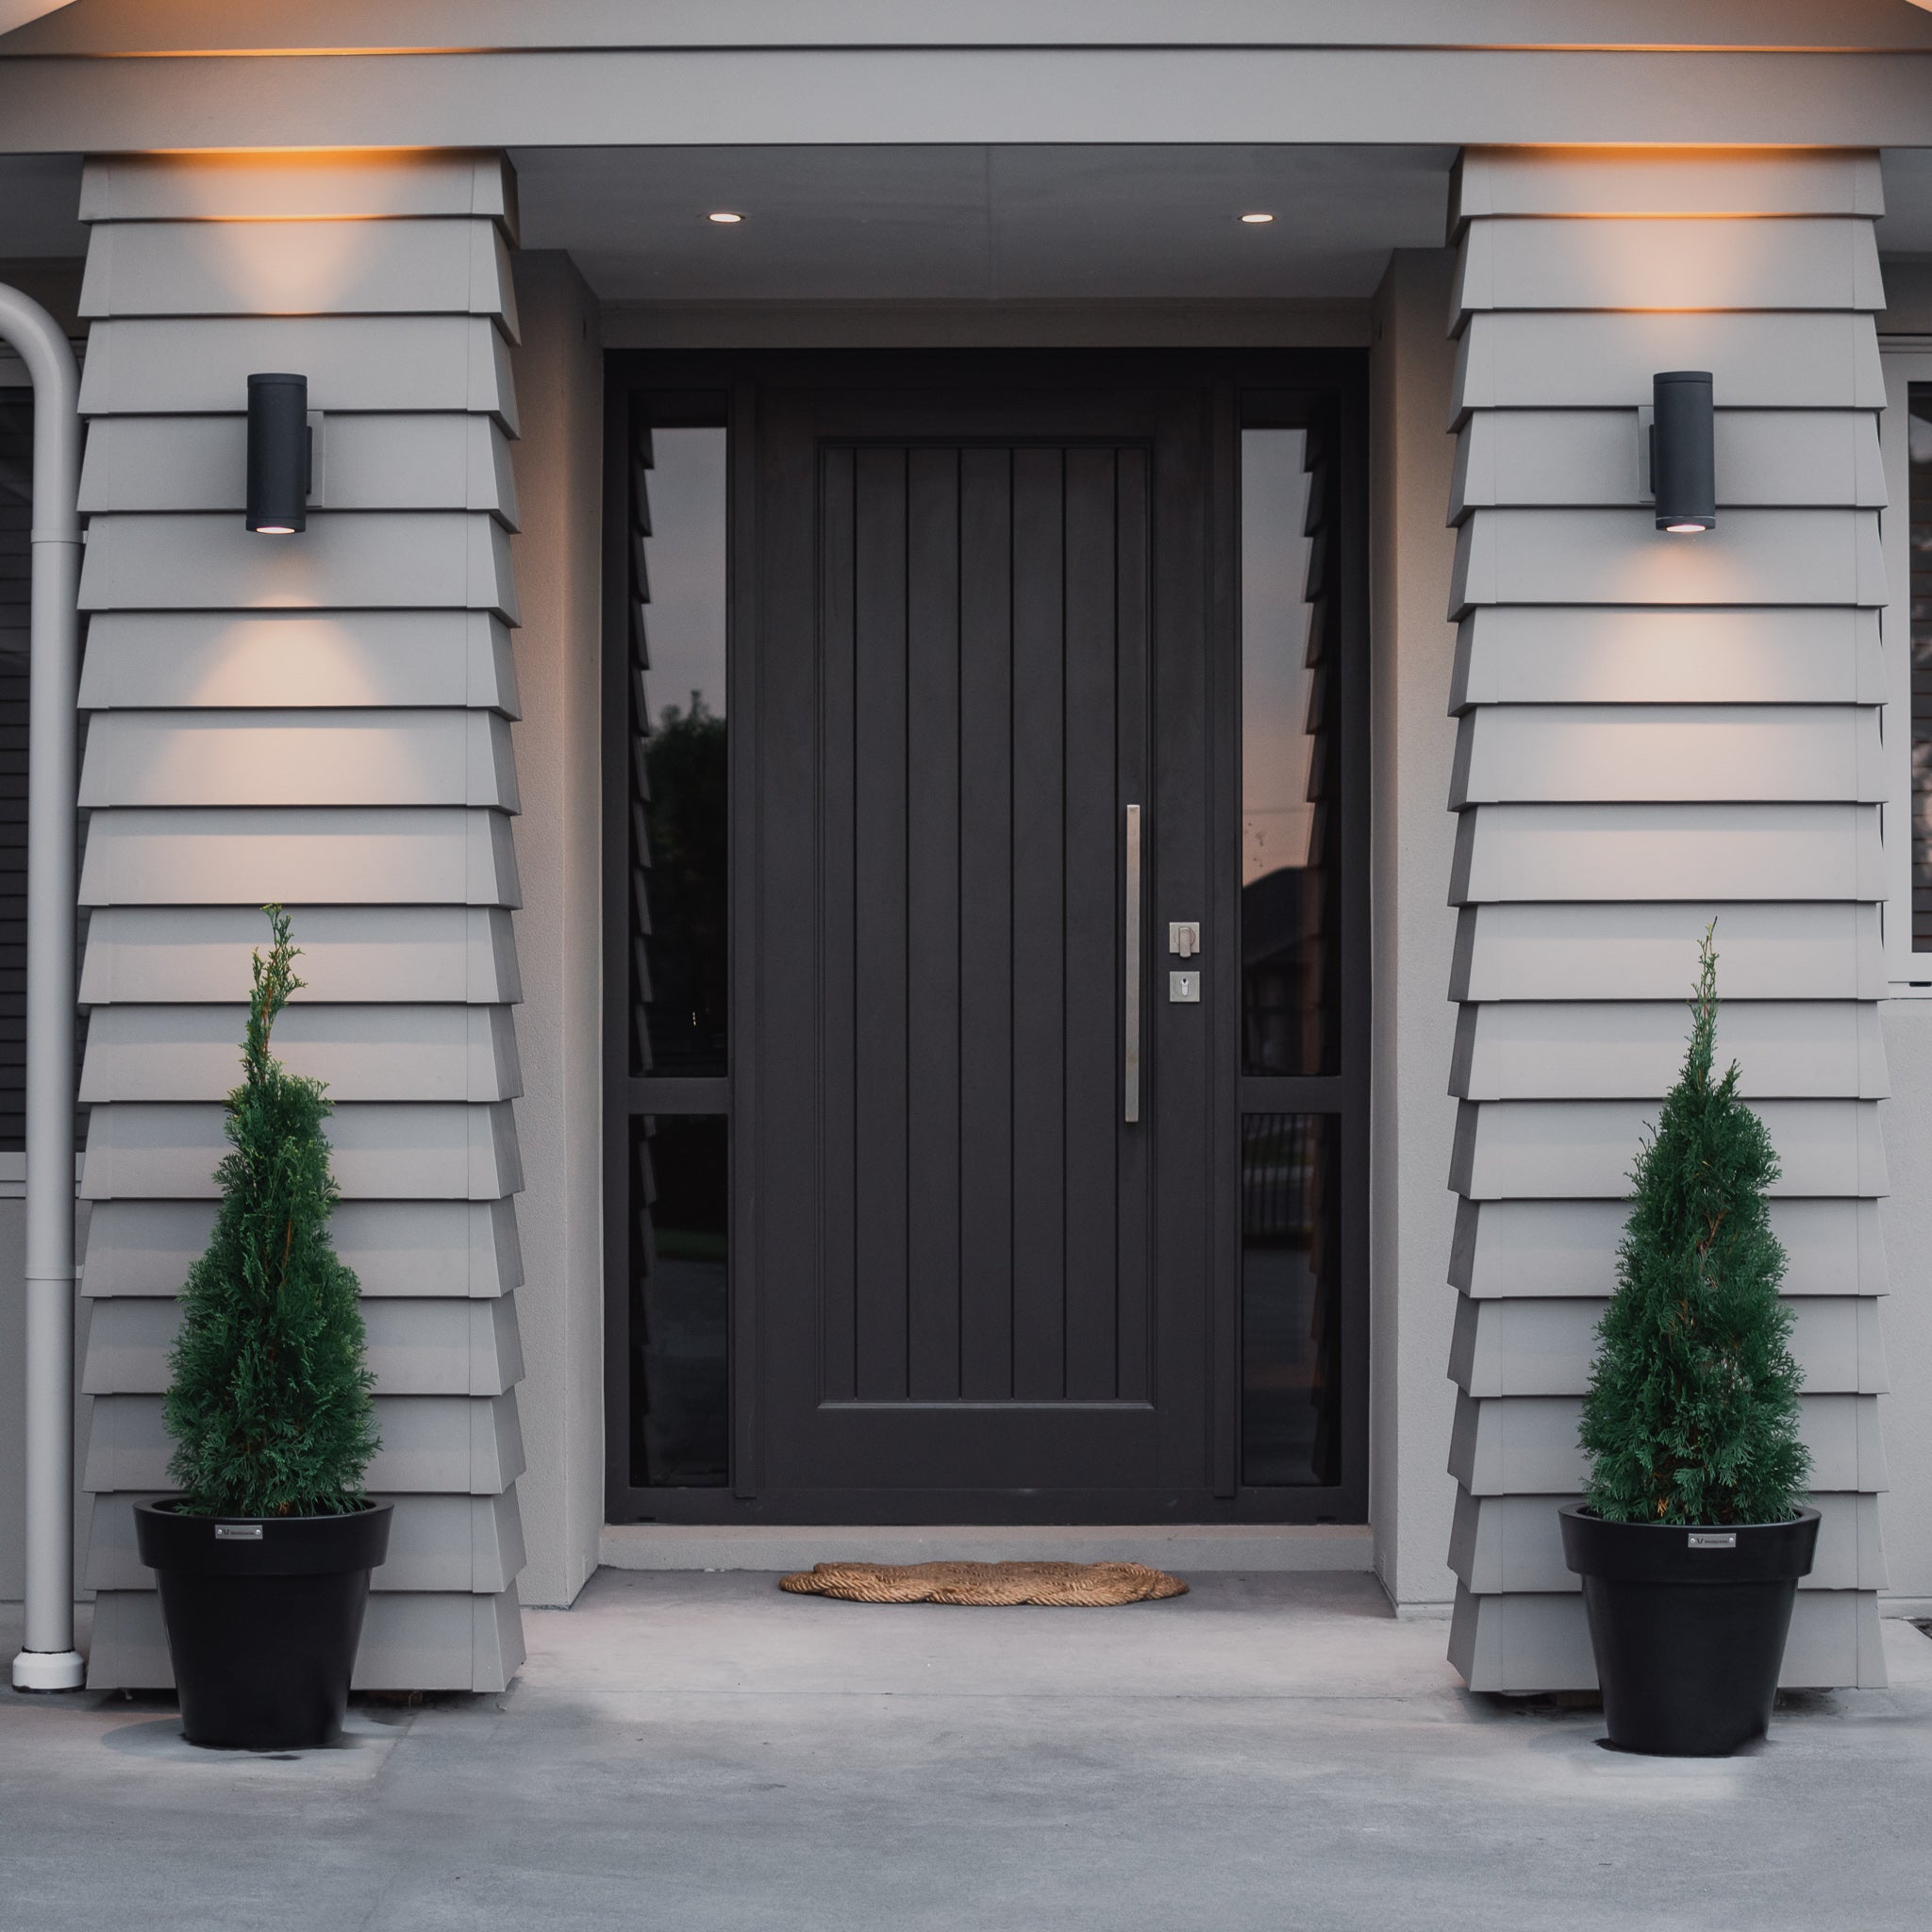 Two black planter pots either side of the front door of a house planted with Conifers.